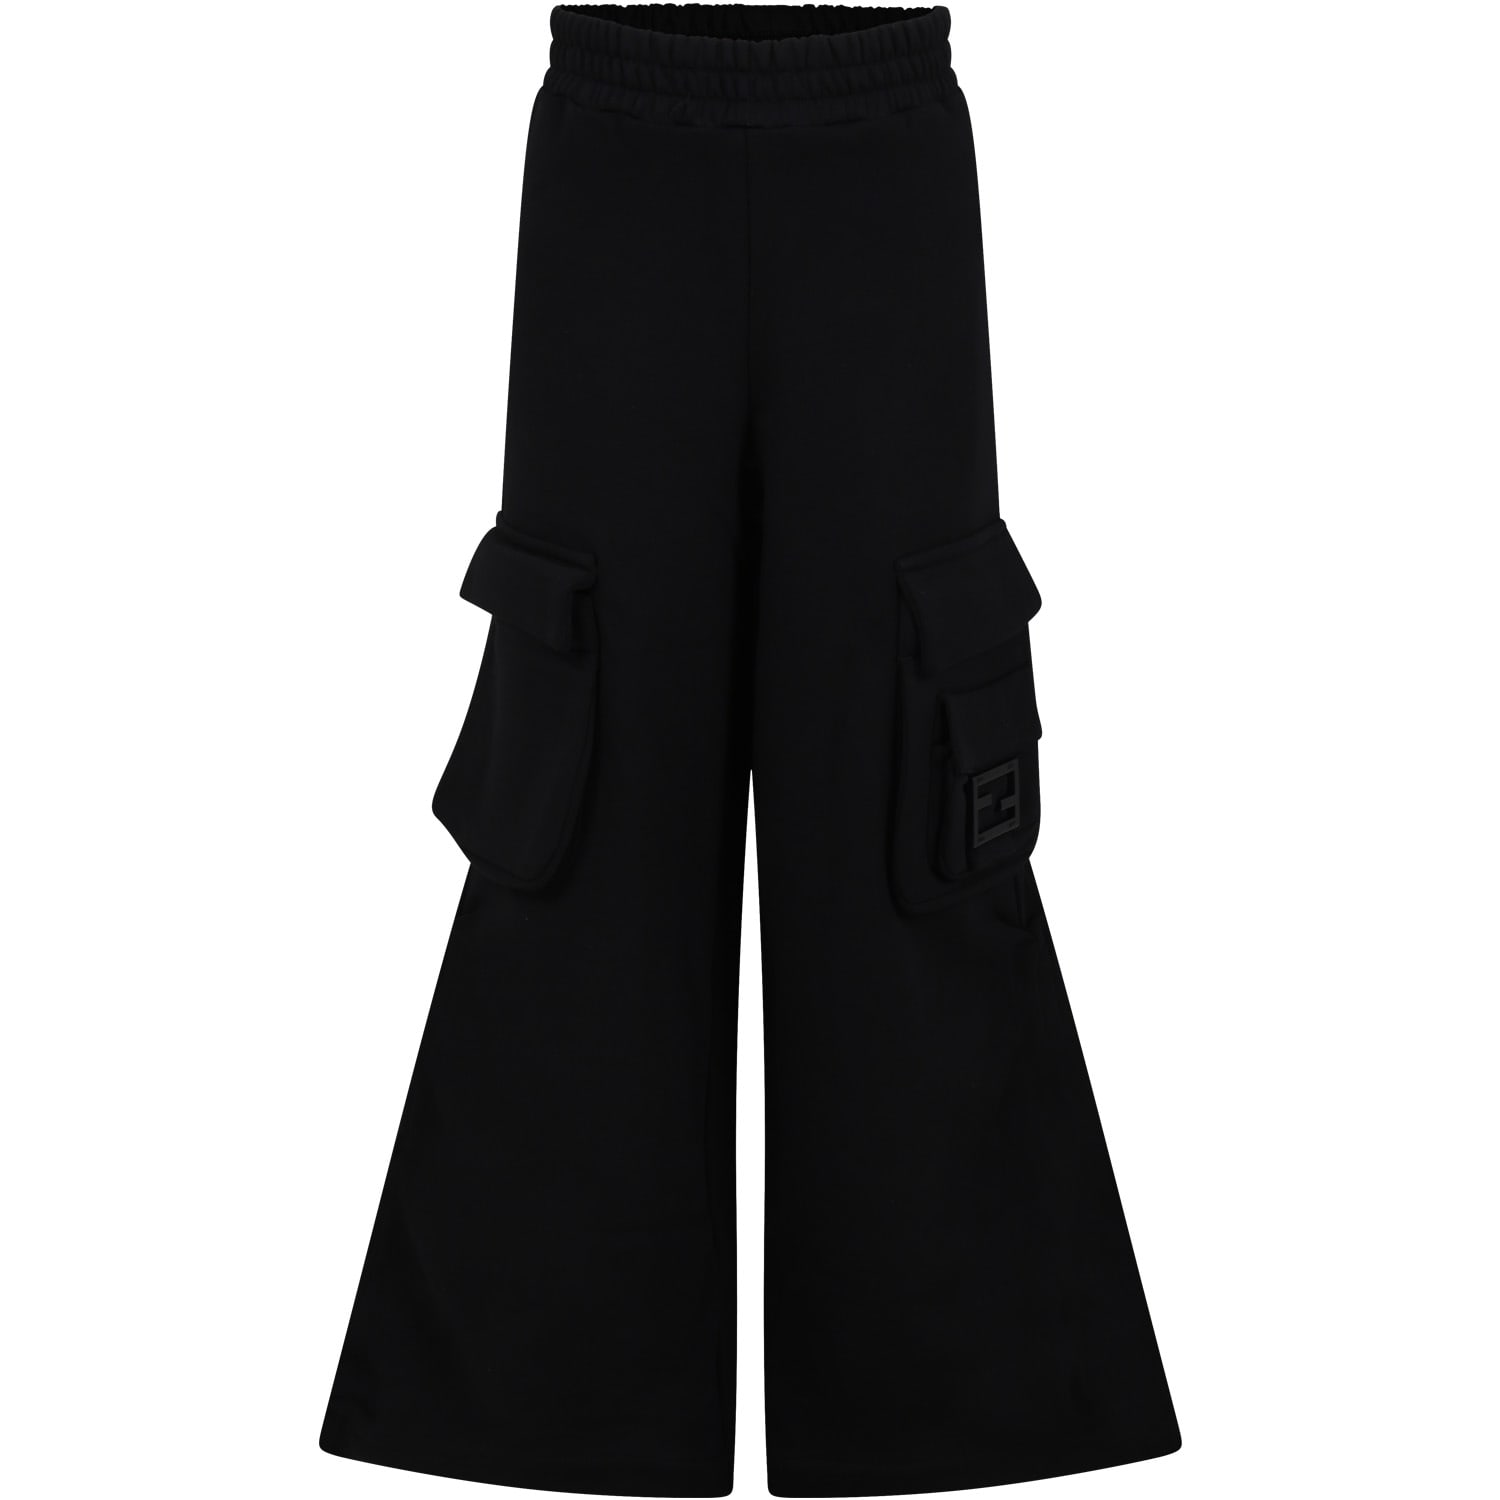 Fendi Kids' Black Trousers Fro Girl With Ff And Baguette